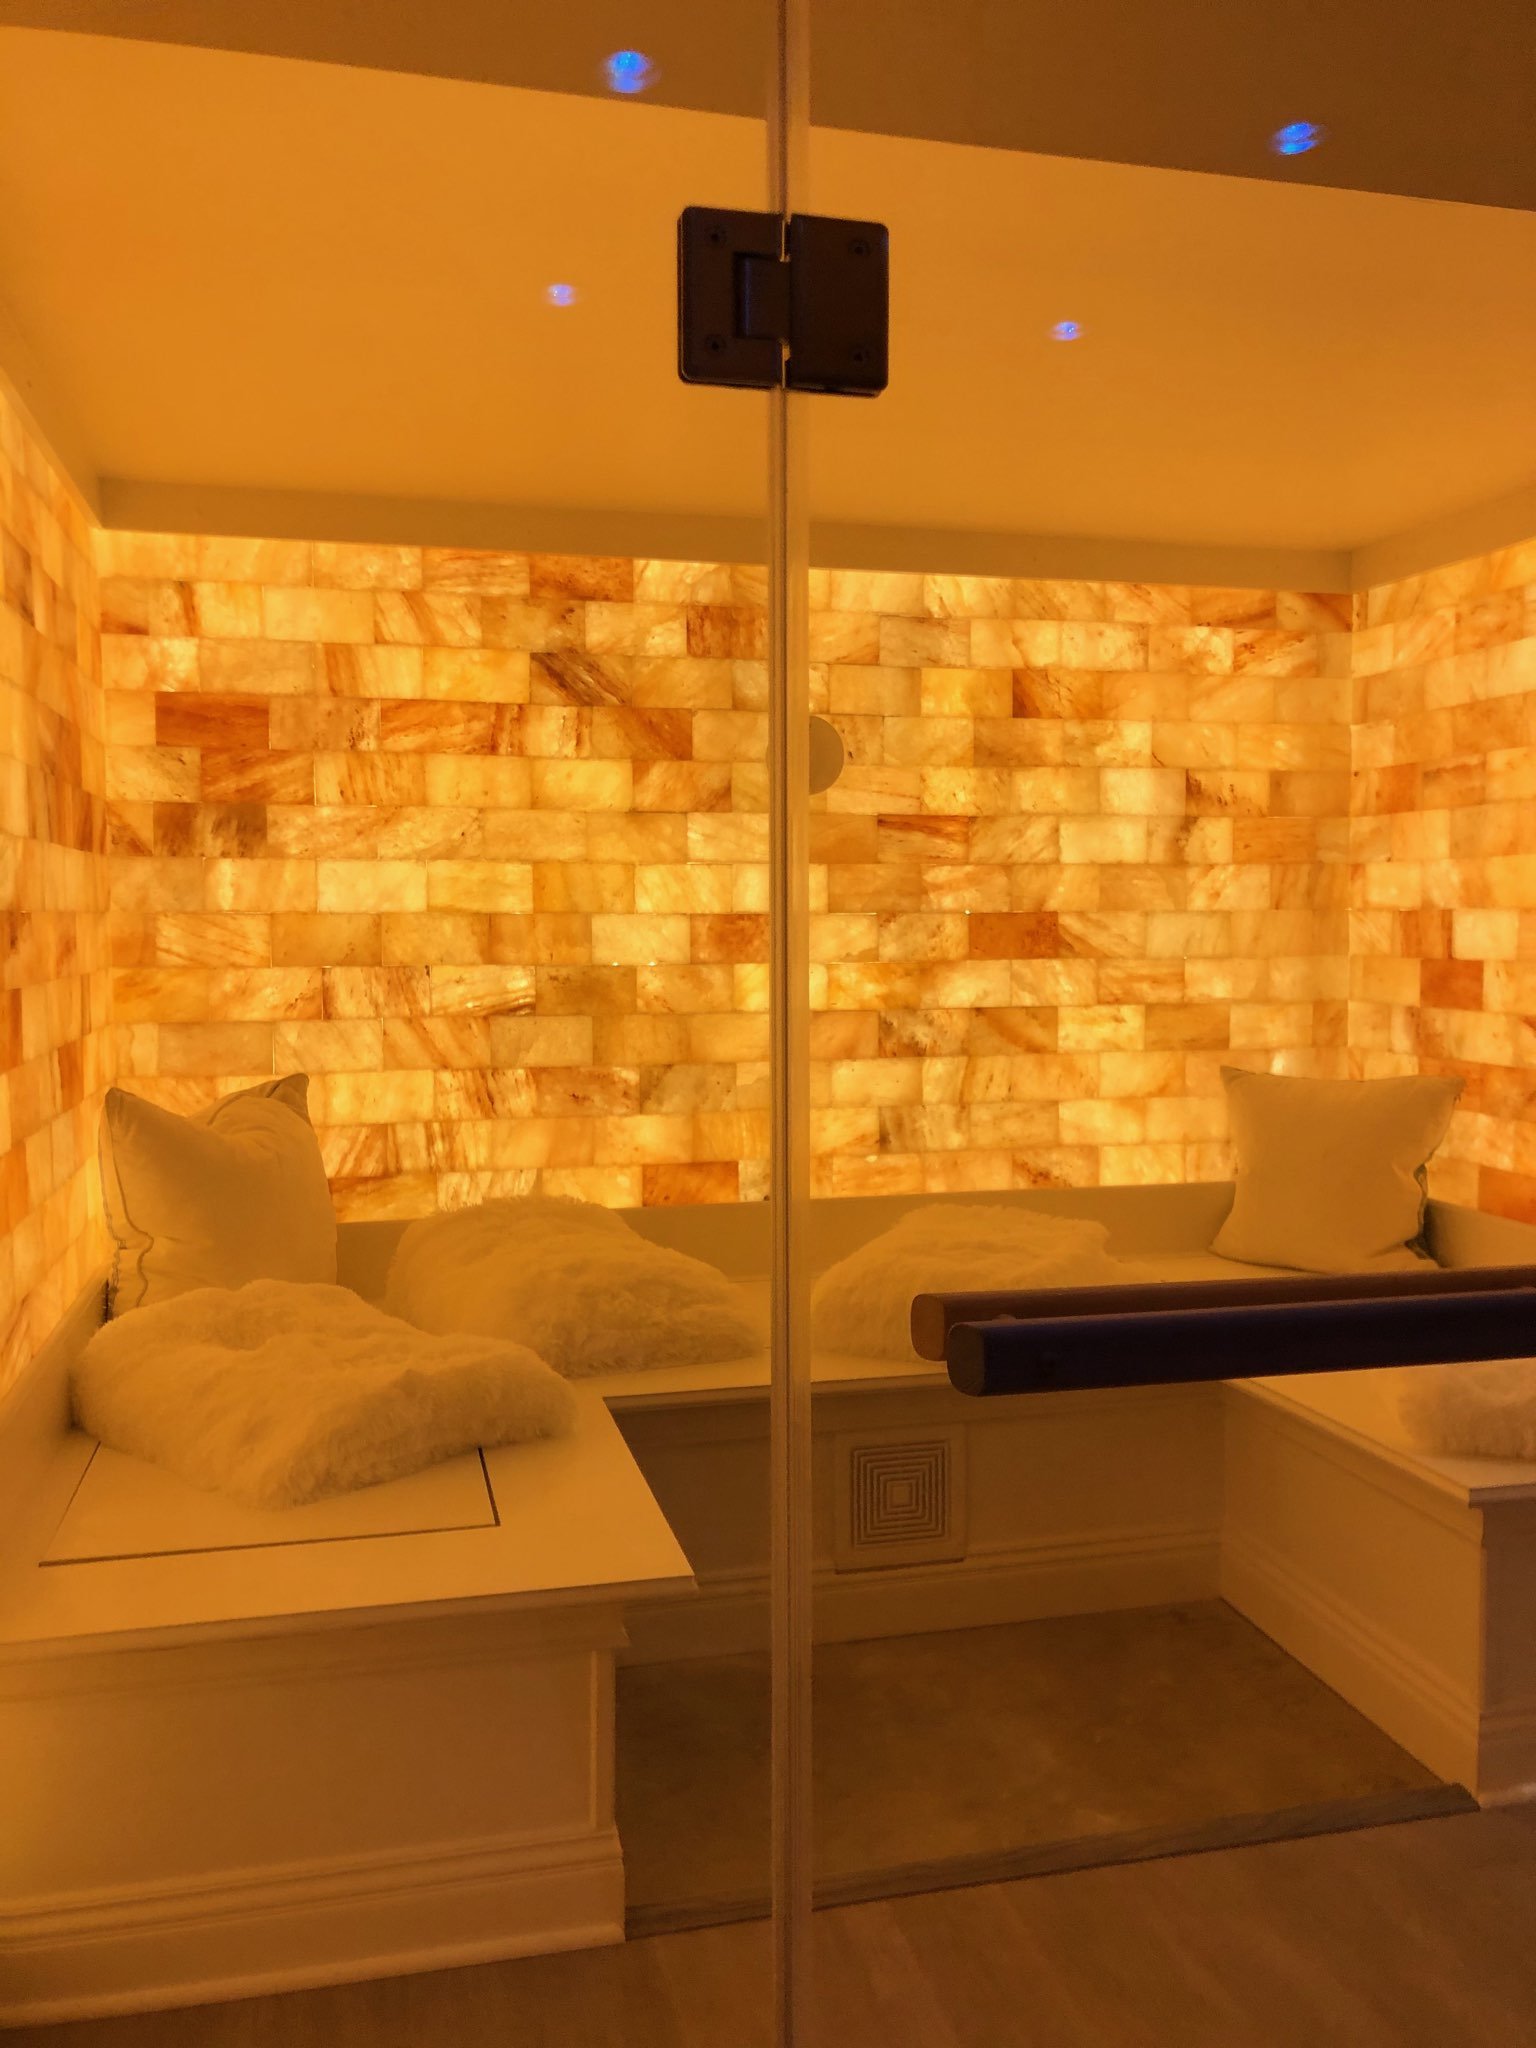 Looking Through Glass At A White Booth With Pillows And An Orange Backlit Salt Stone Wall.